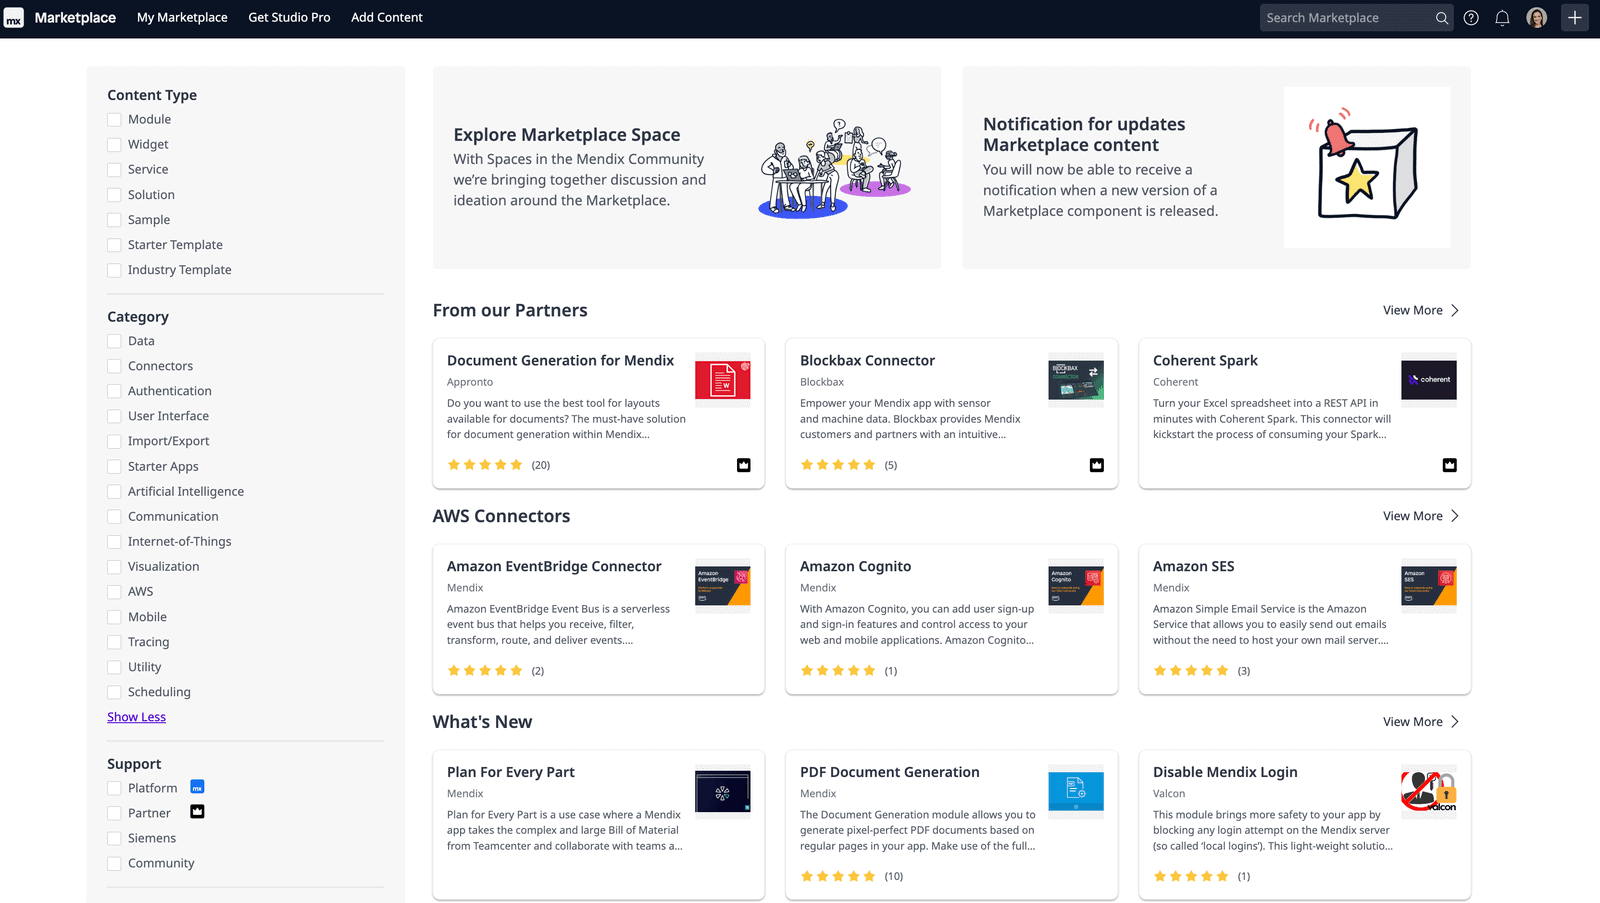 Marketplace new content types and categories.